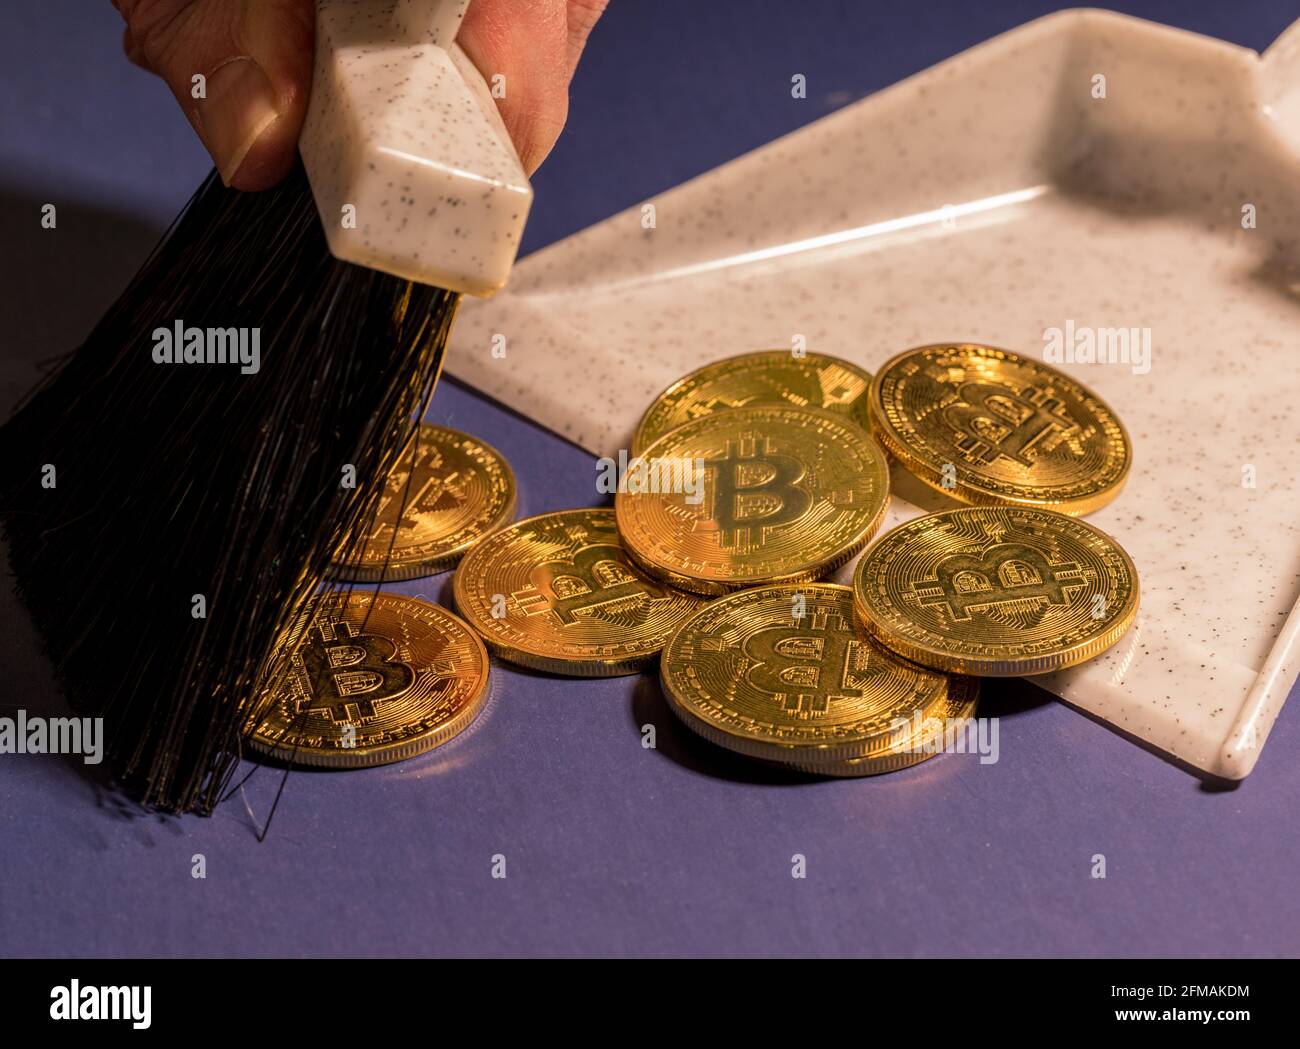 Brushing bitcoins into a dustpan as concept for the collapse in value of cyber coins and digital currency Stock Photo